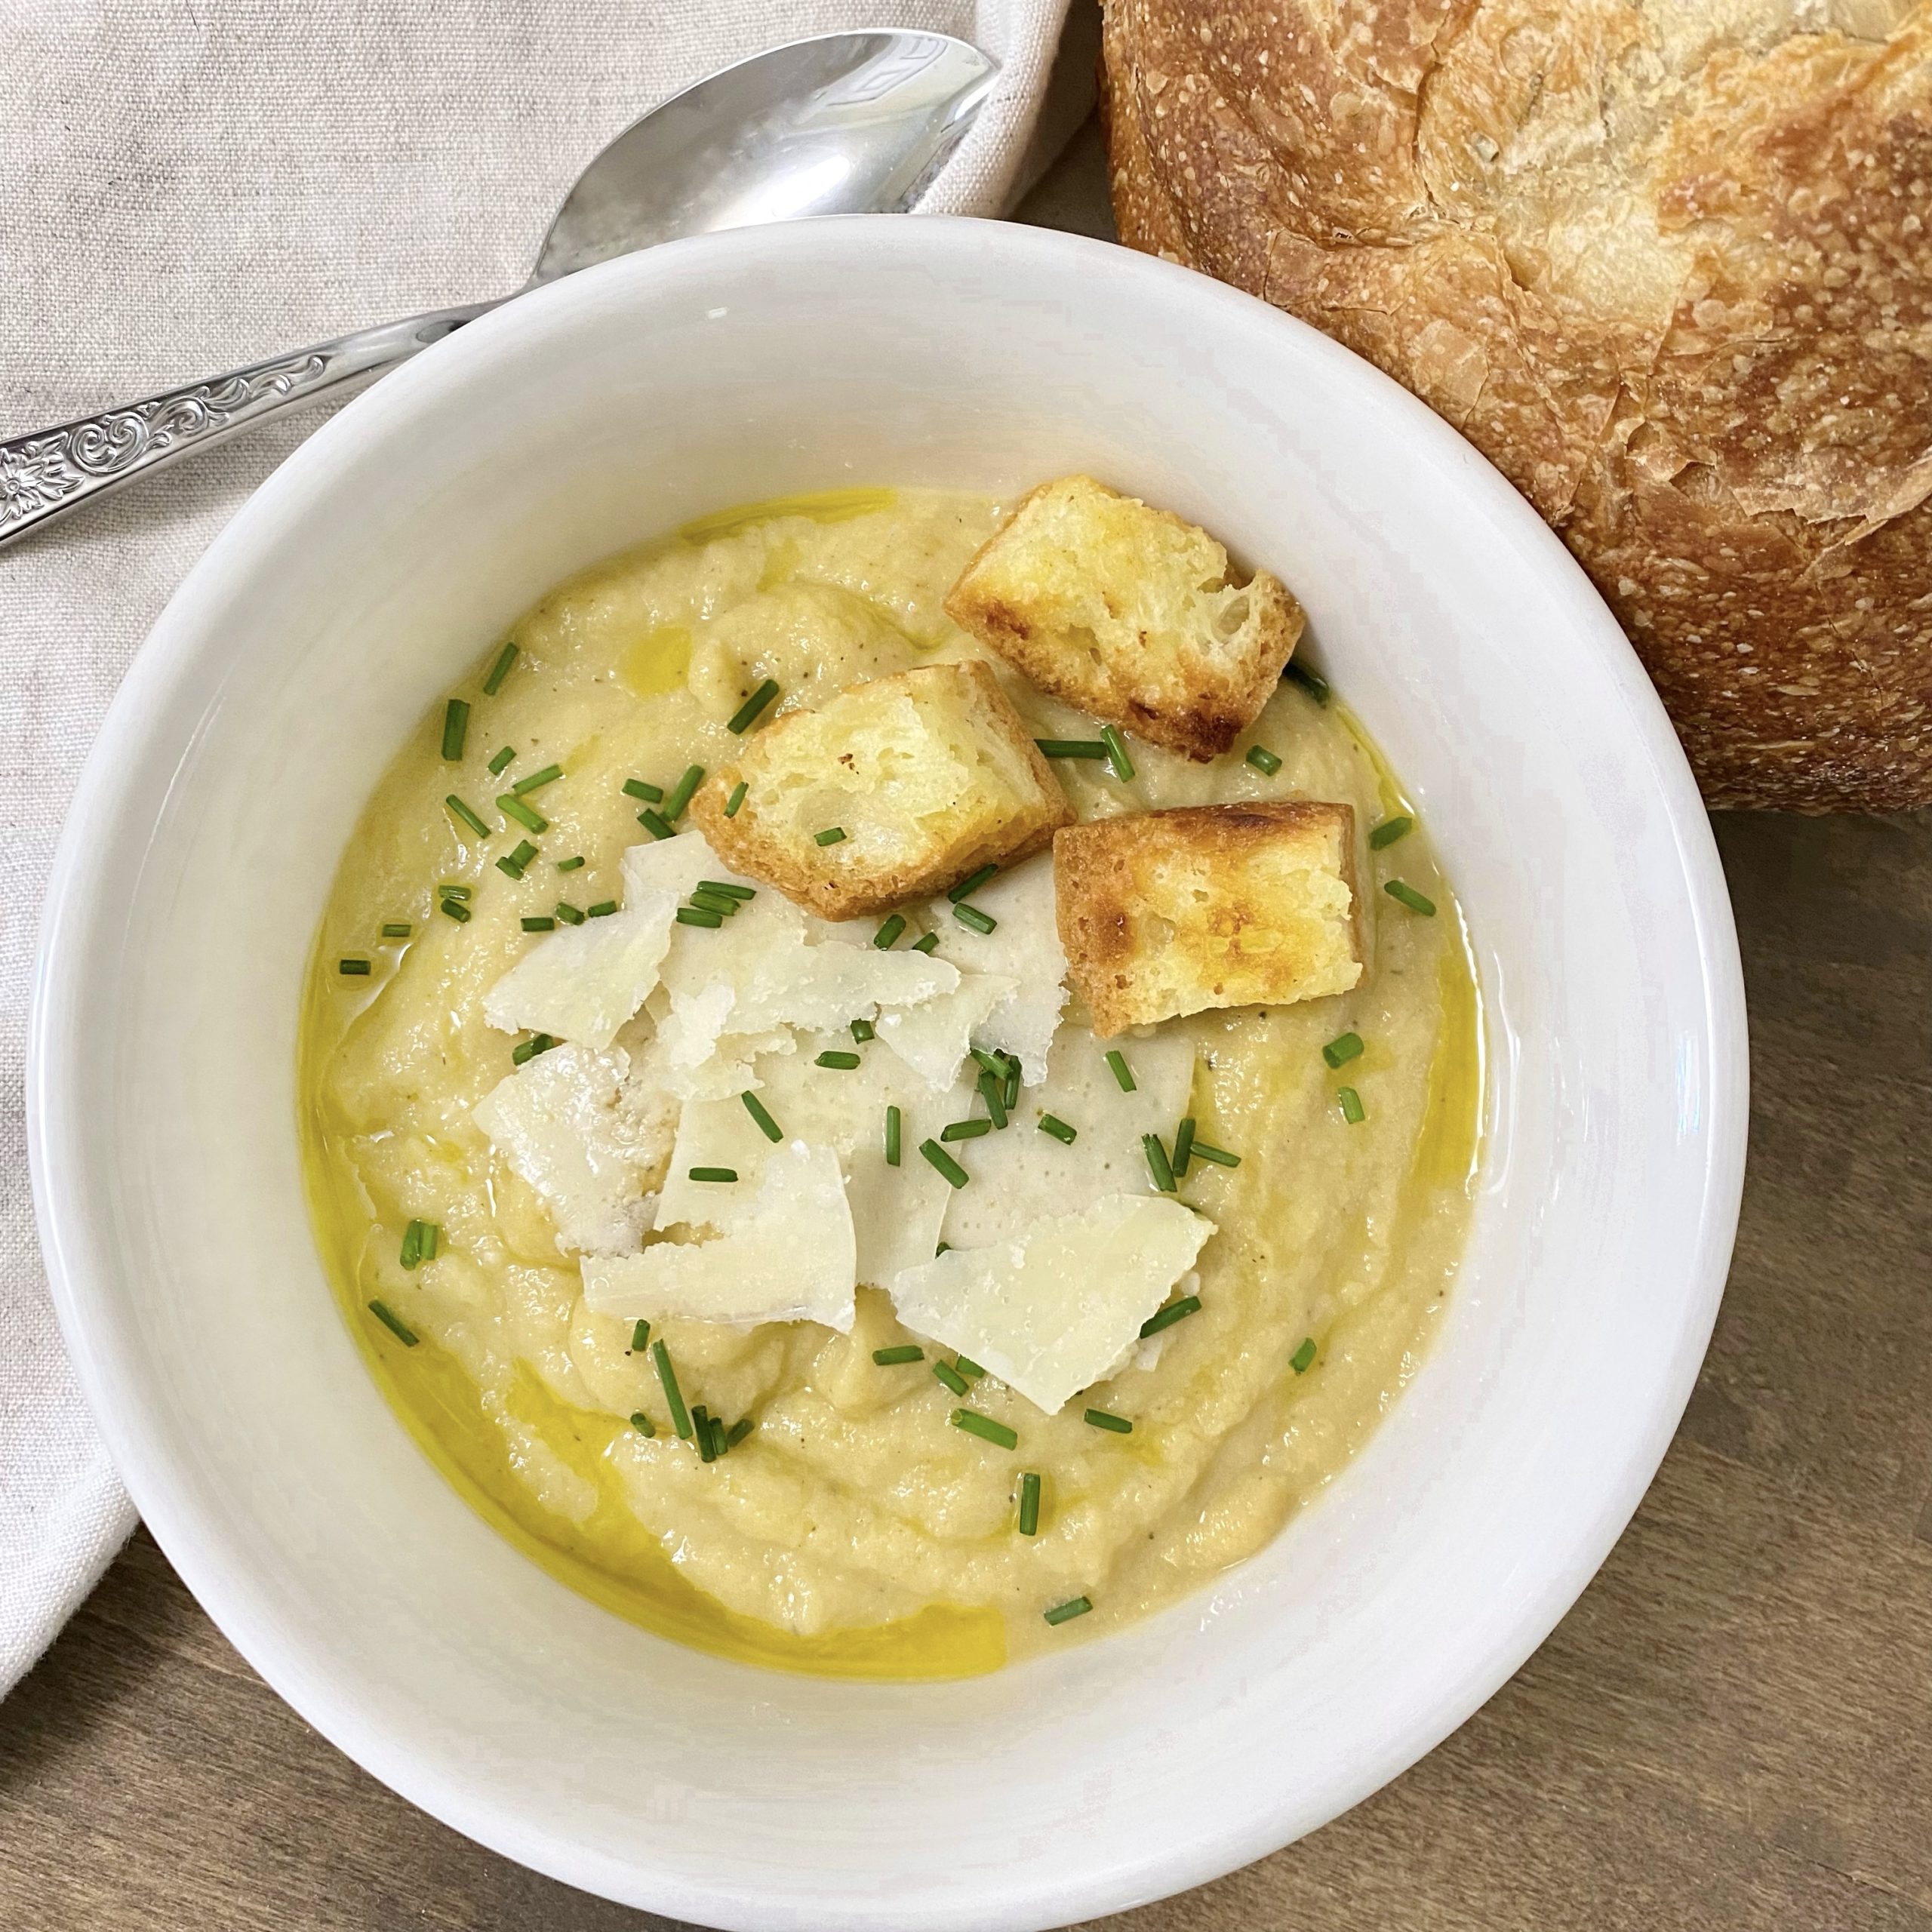 Creamy cauliflower soup with Basil Olive Oil in a white bowl garnished with parmesan cheese, chives, and croutons with a spoon and rustic bread on the side.